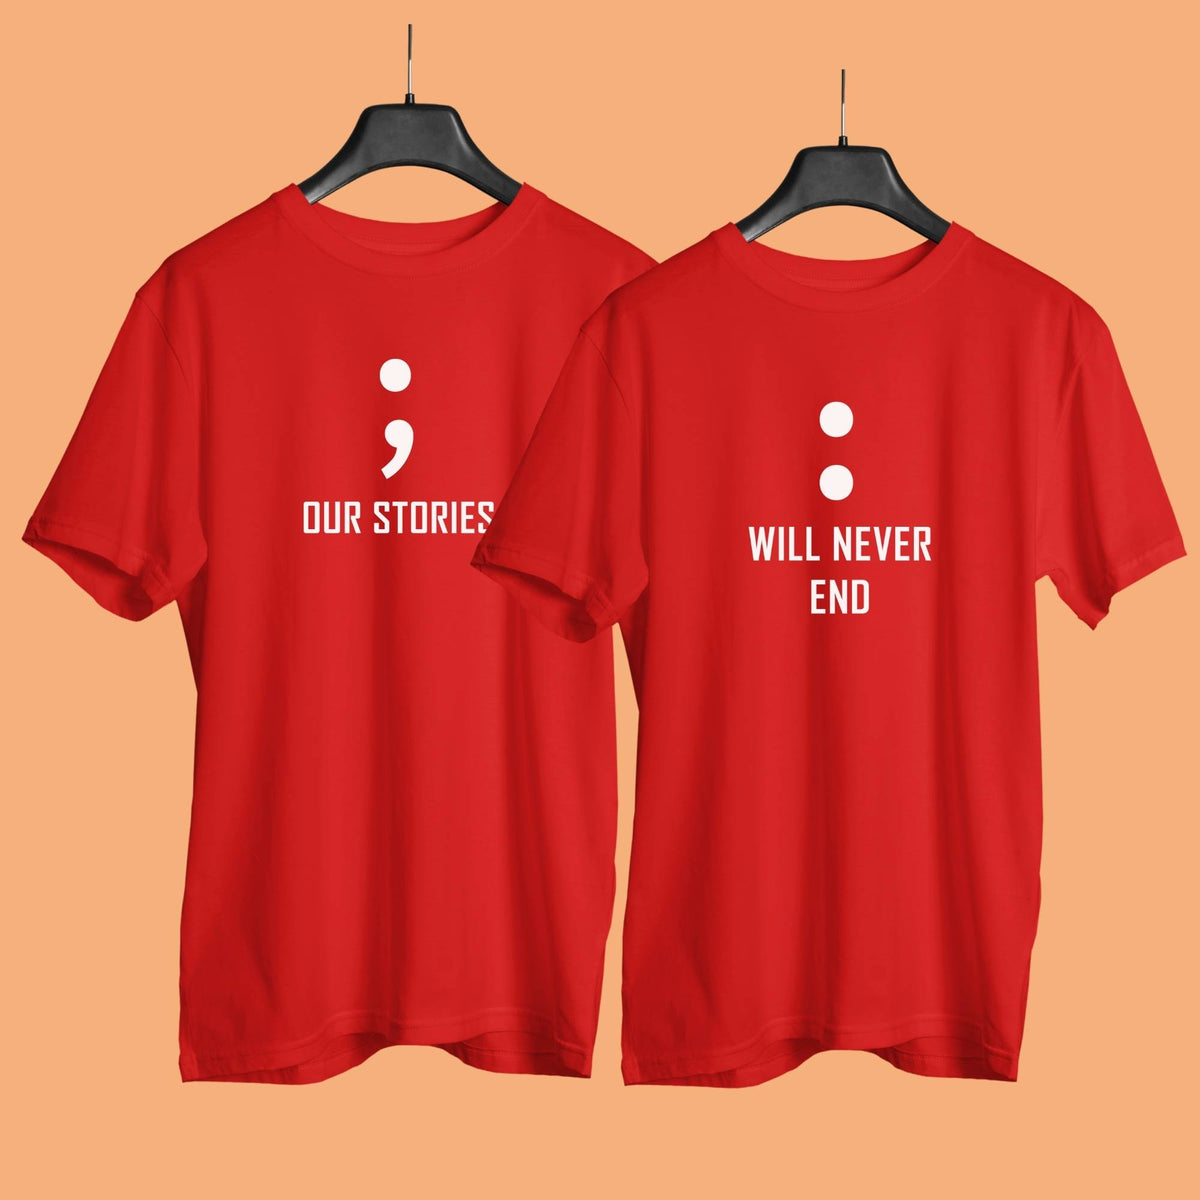 our-stories-will-never-end-printed-couple-t-shirt-cotton-red-color-premium-quality-gogirgit